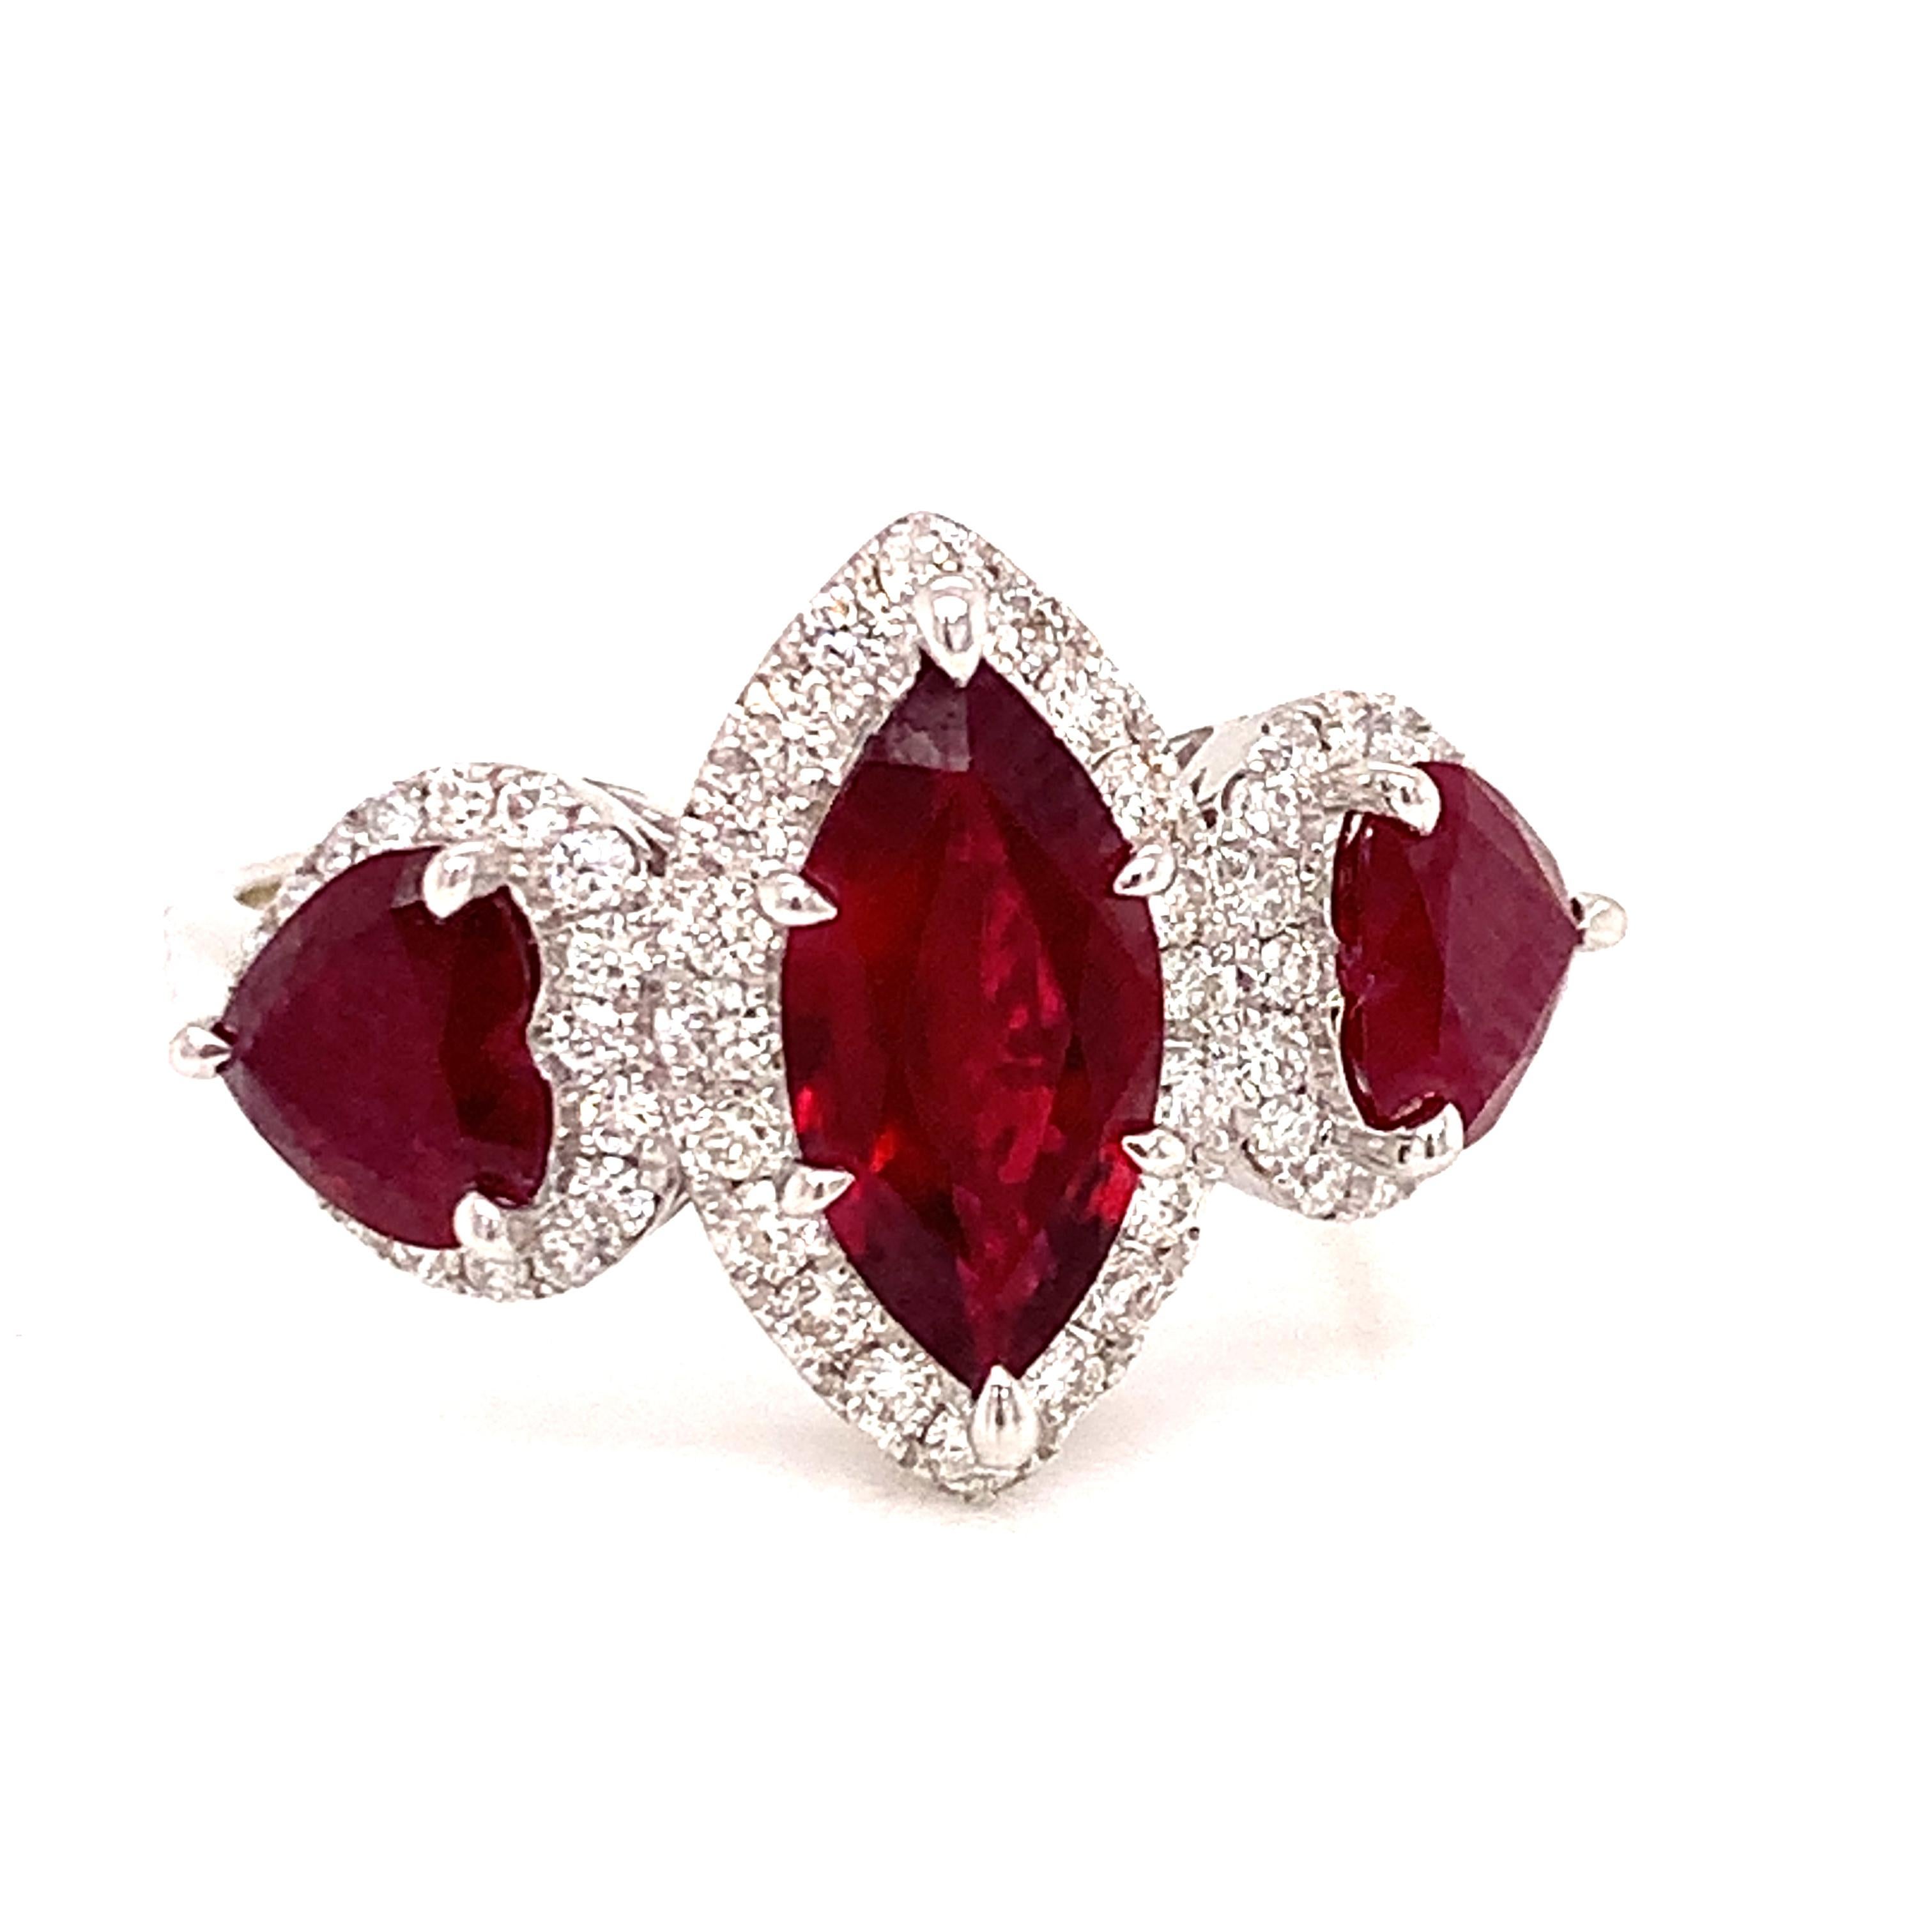 Old world craftsmanship with todays technology, this vintage inspired ring may be even better than Grandmas.   A stunning 1.15 carat marquis gem quality genuine ruby,  surrounded by 1.41 cttw in round diamonds and  1.08 cttw in 2 heart shaped